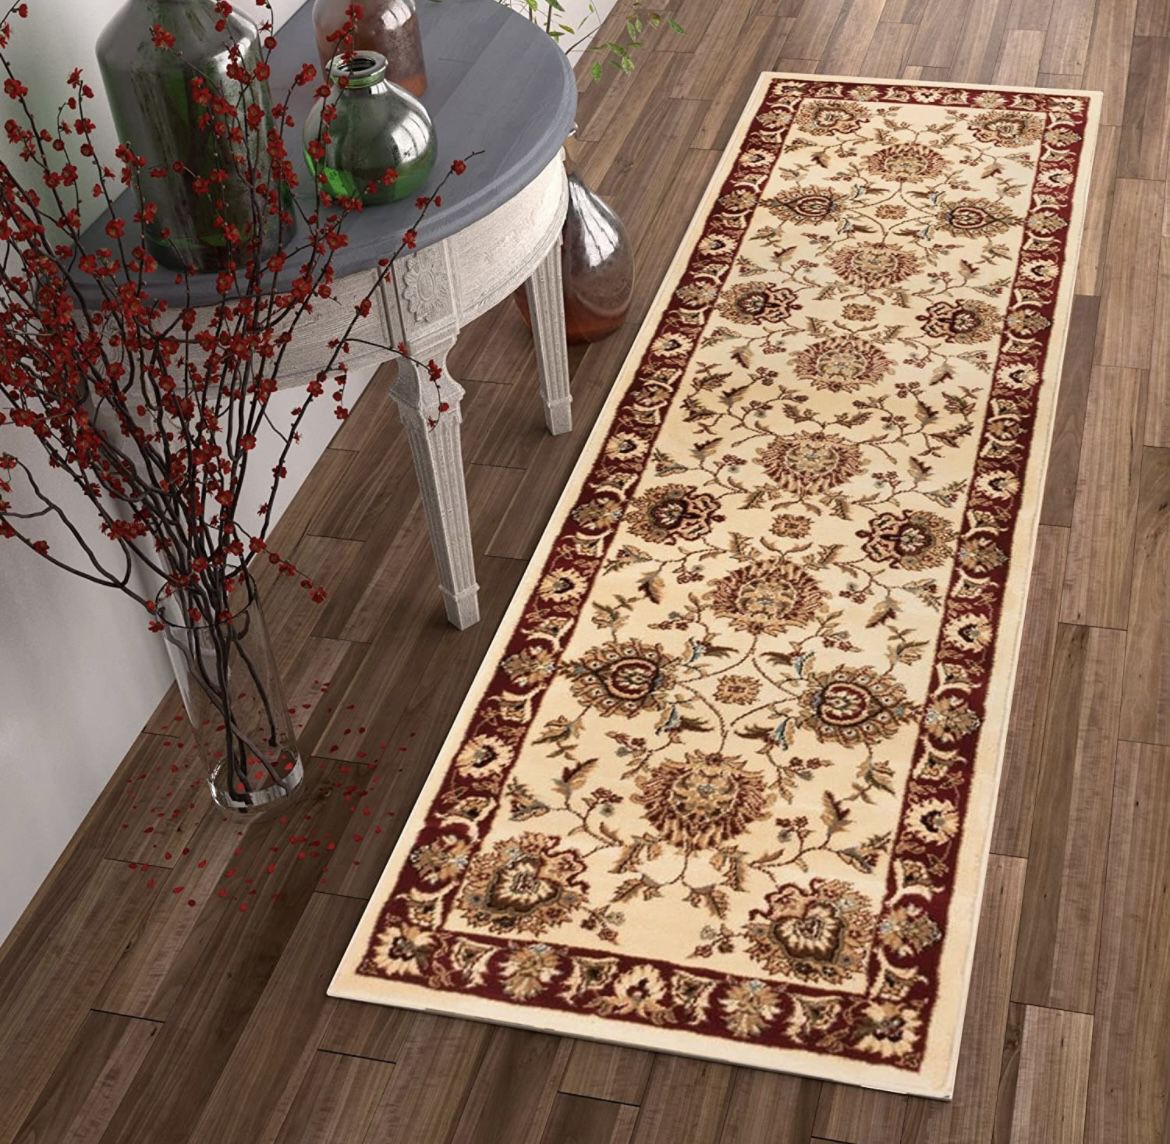 Runner Rug Stain Contemporary Floral Thick Hallway Entryway 